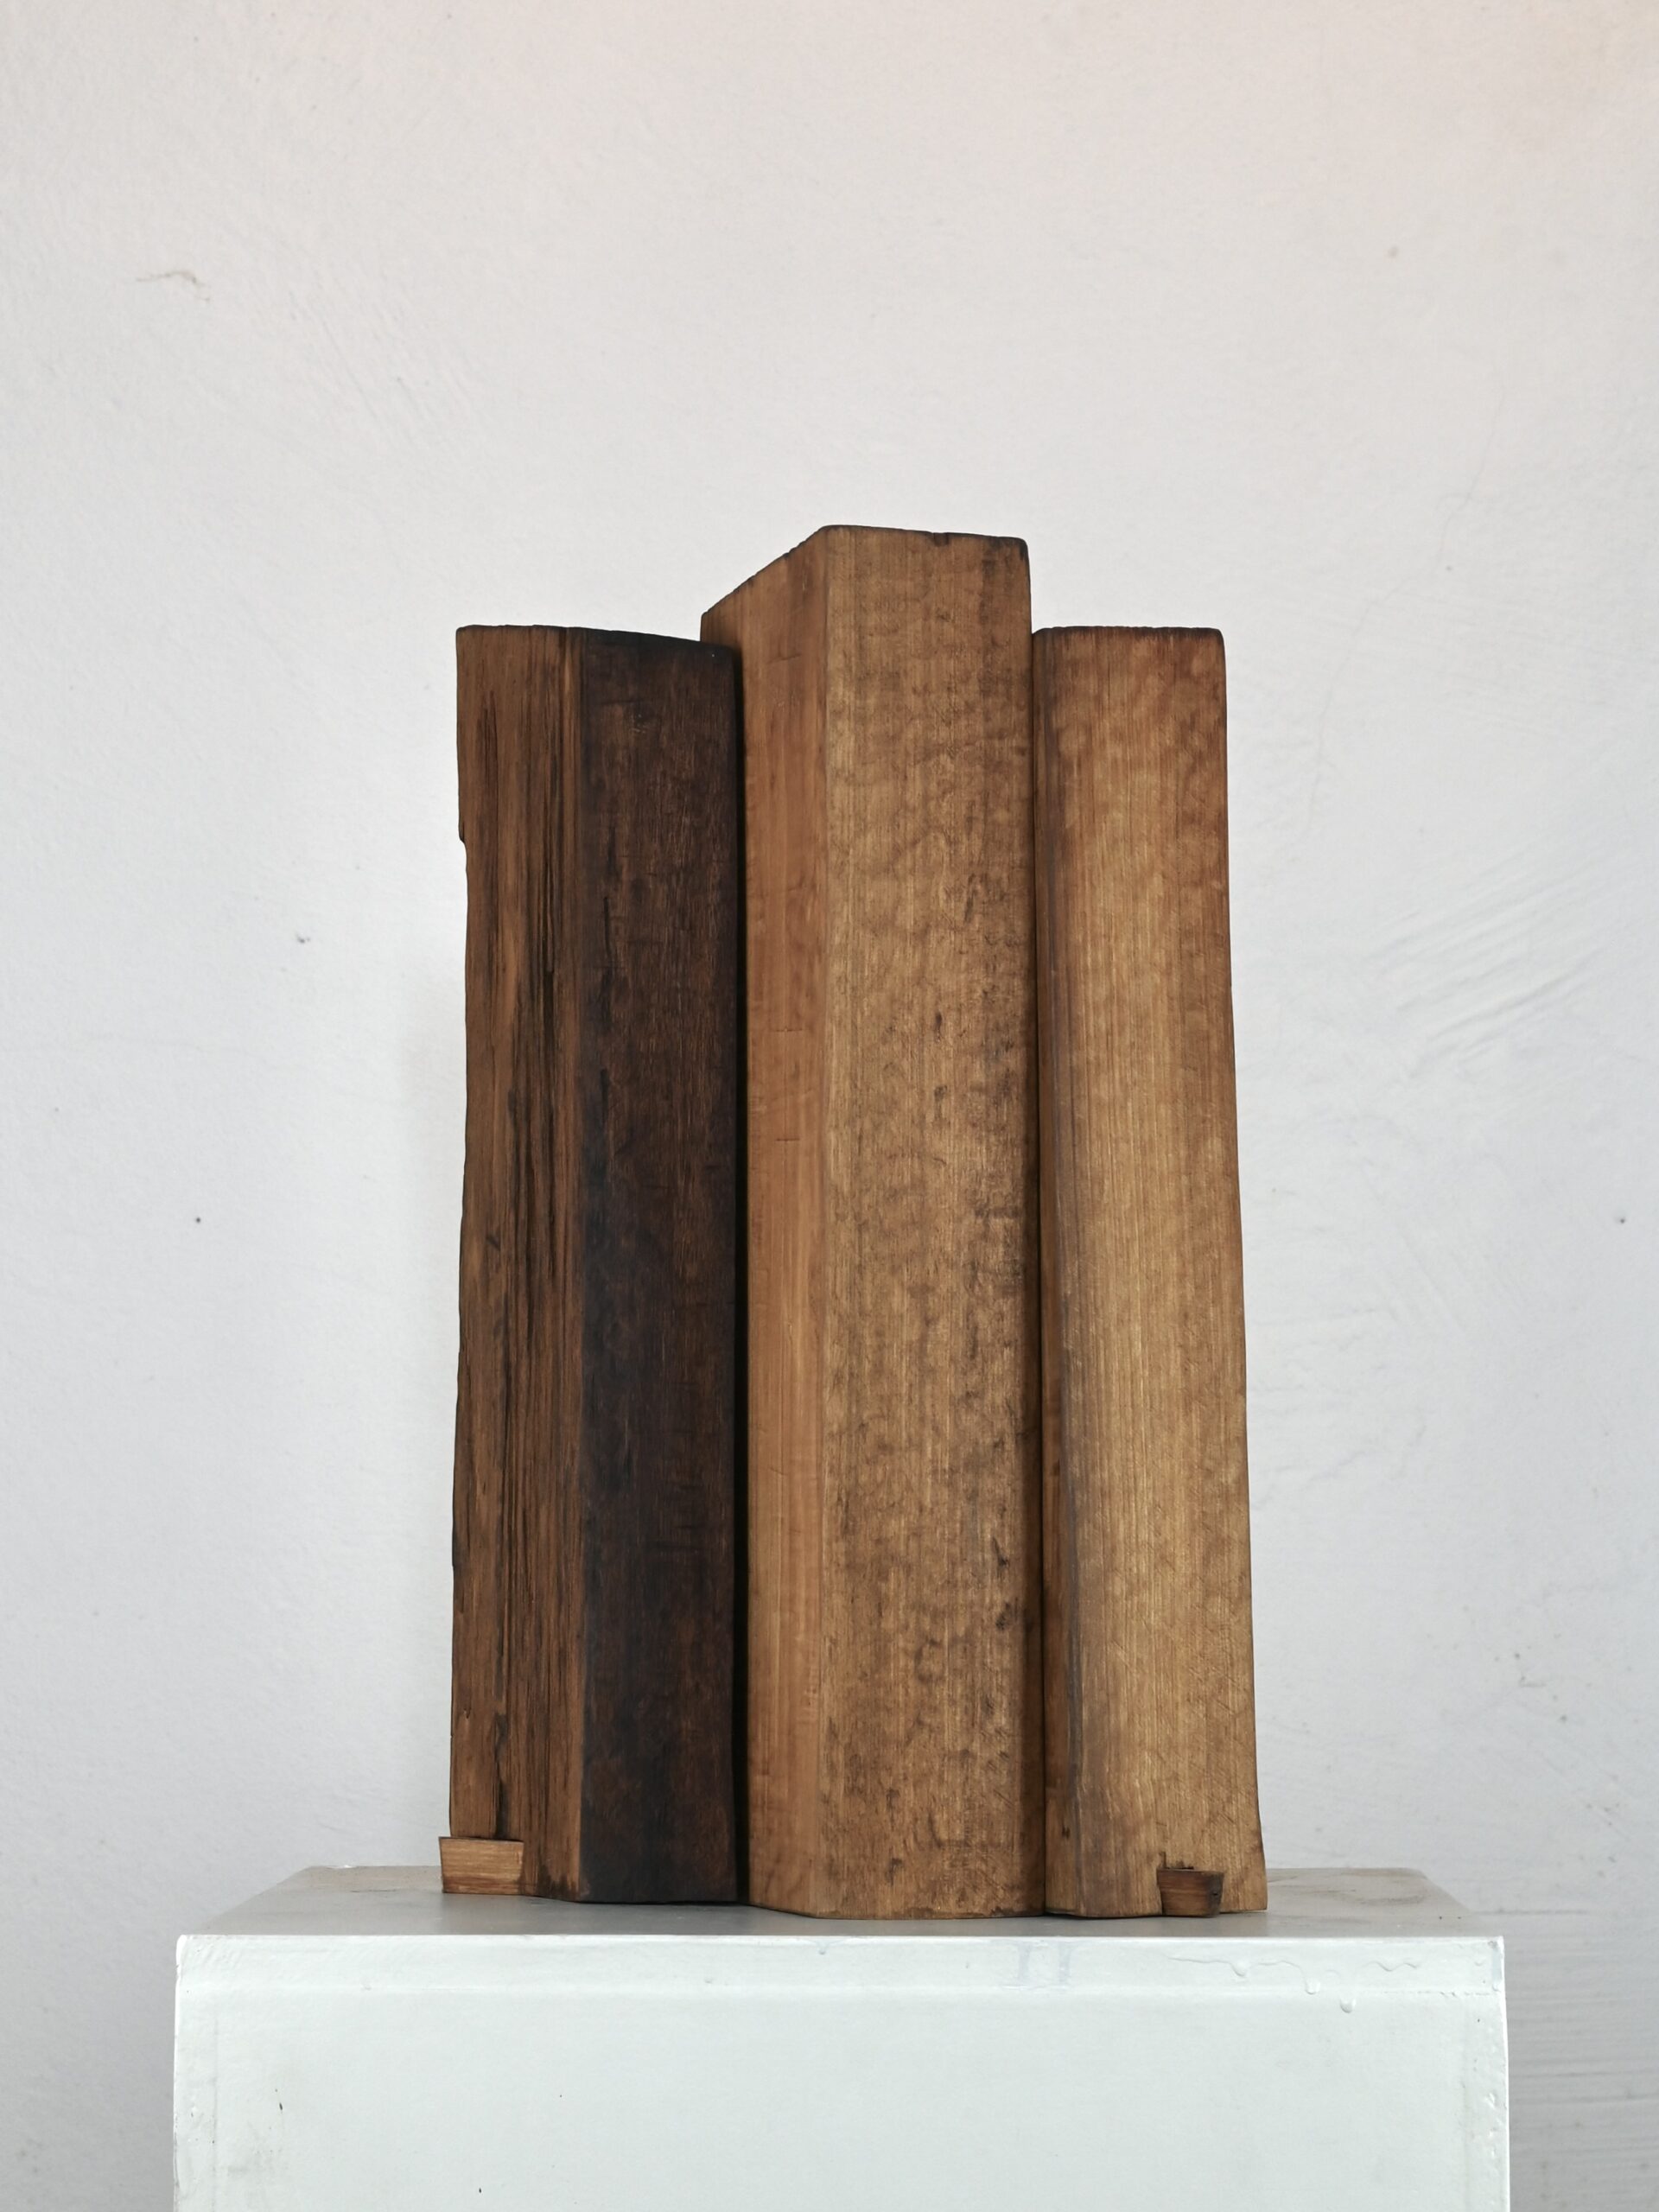 Coherence 2019, walnut, height 45 cm